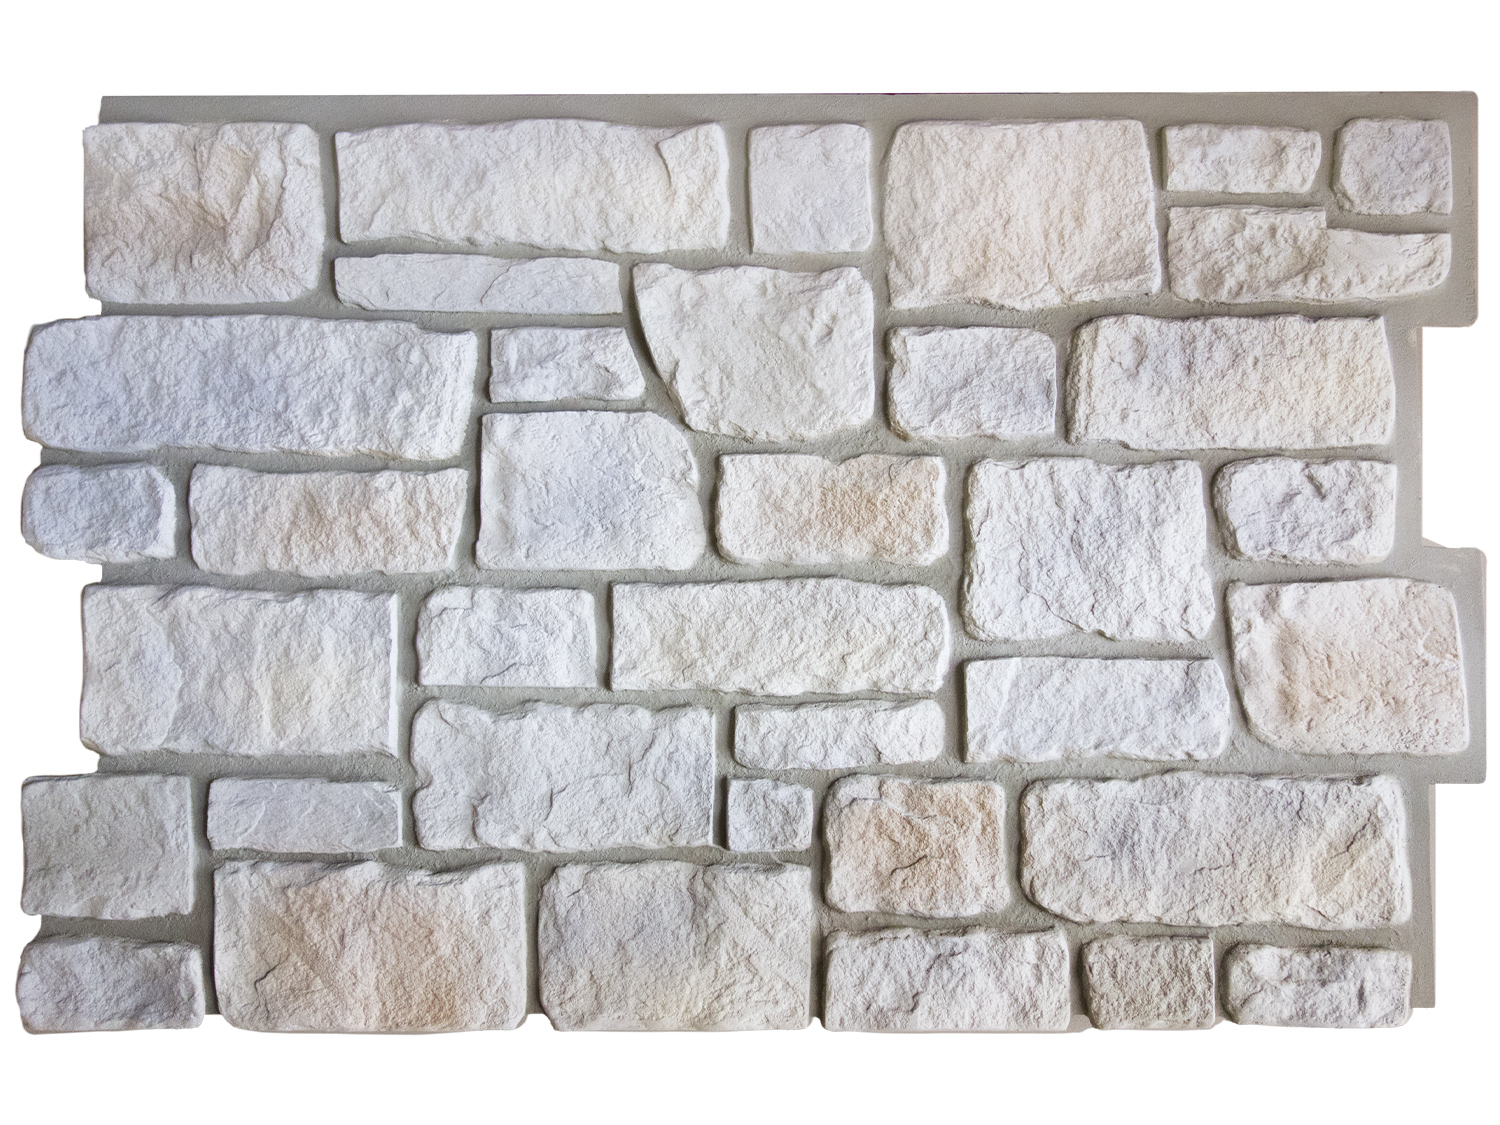 Are you able to grout these stone panels?